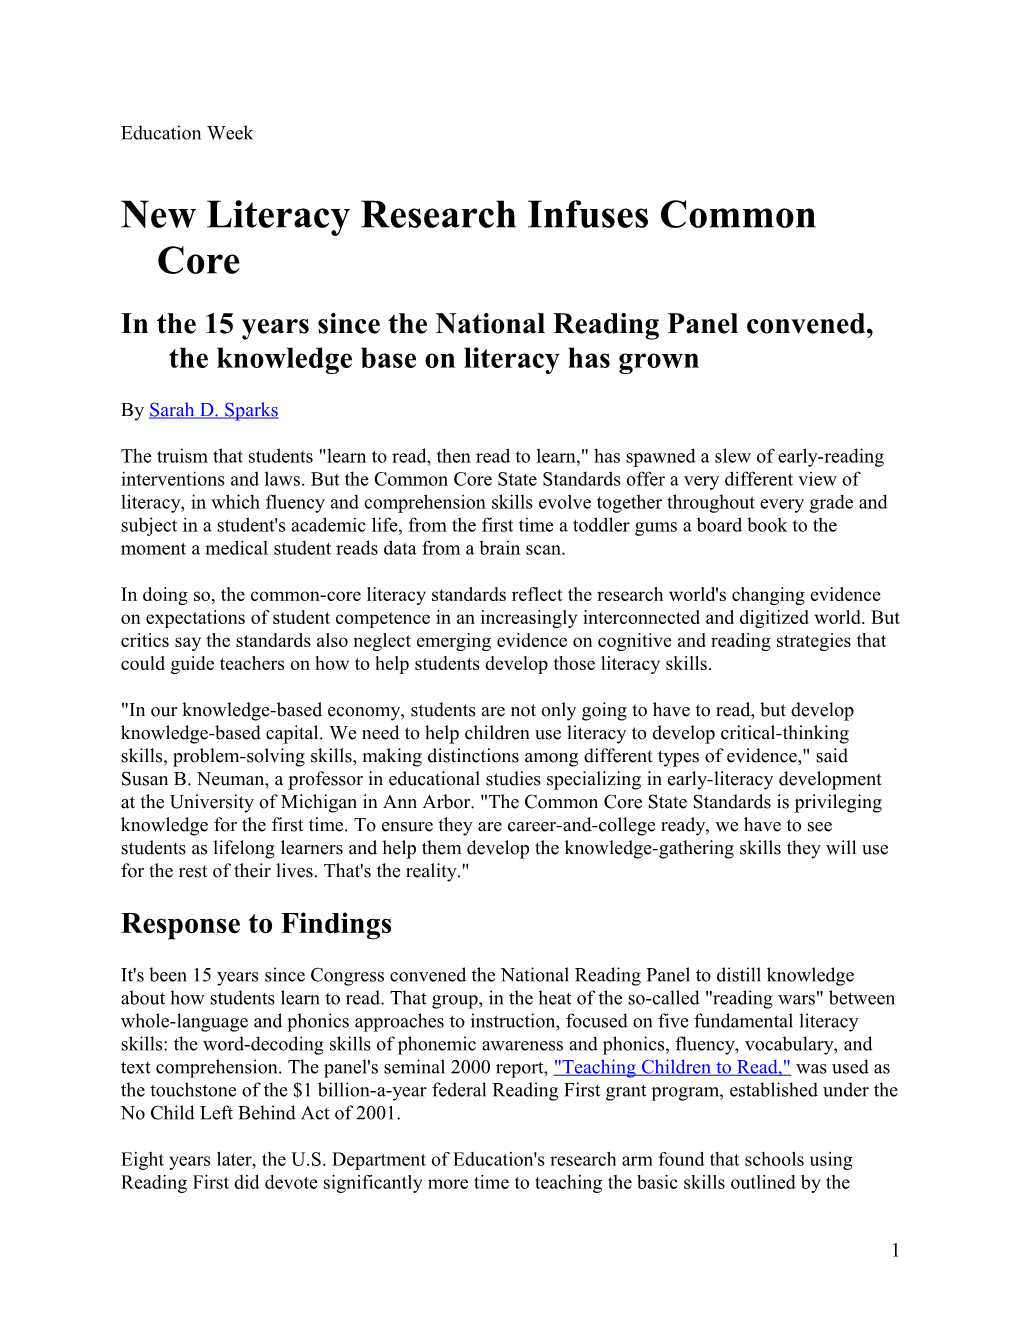 New Literacy Research Infuses Common Core